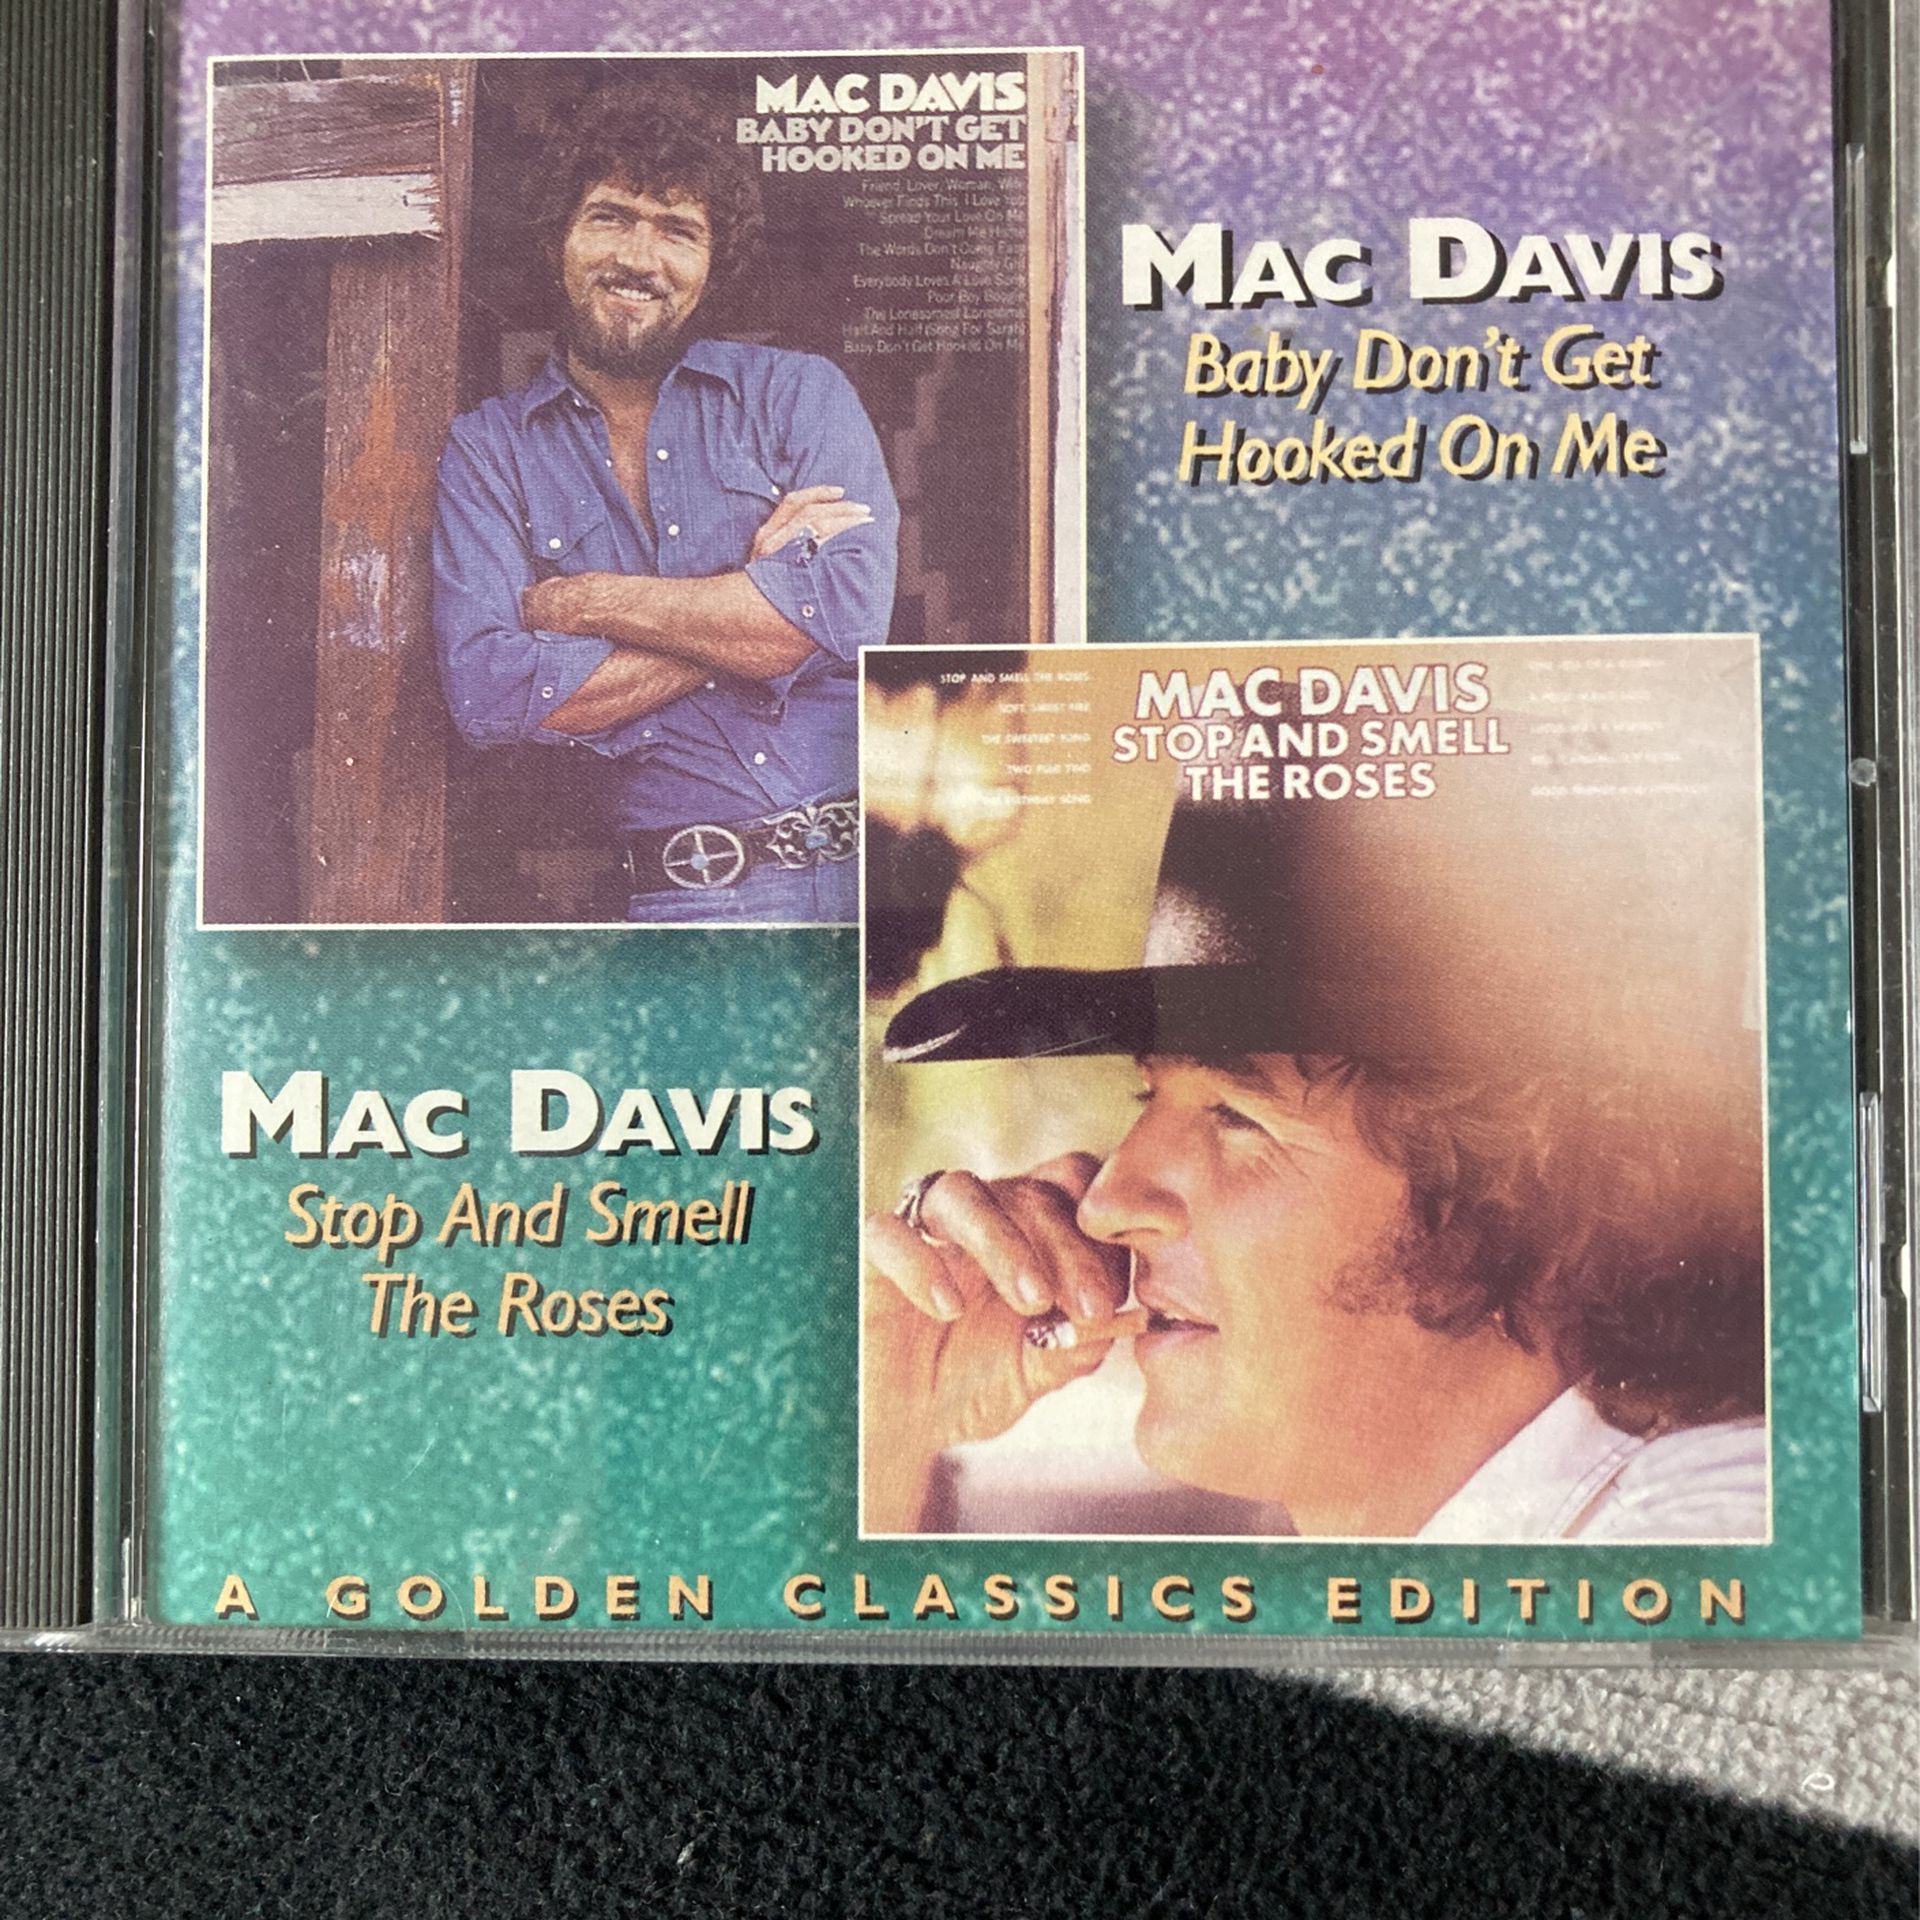 Mac Davis Baby Don’t Get Hooked On Me/Stop And Smell The Roses Double CD Golden Classics Edition